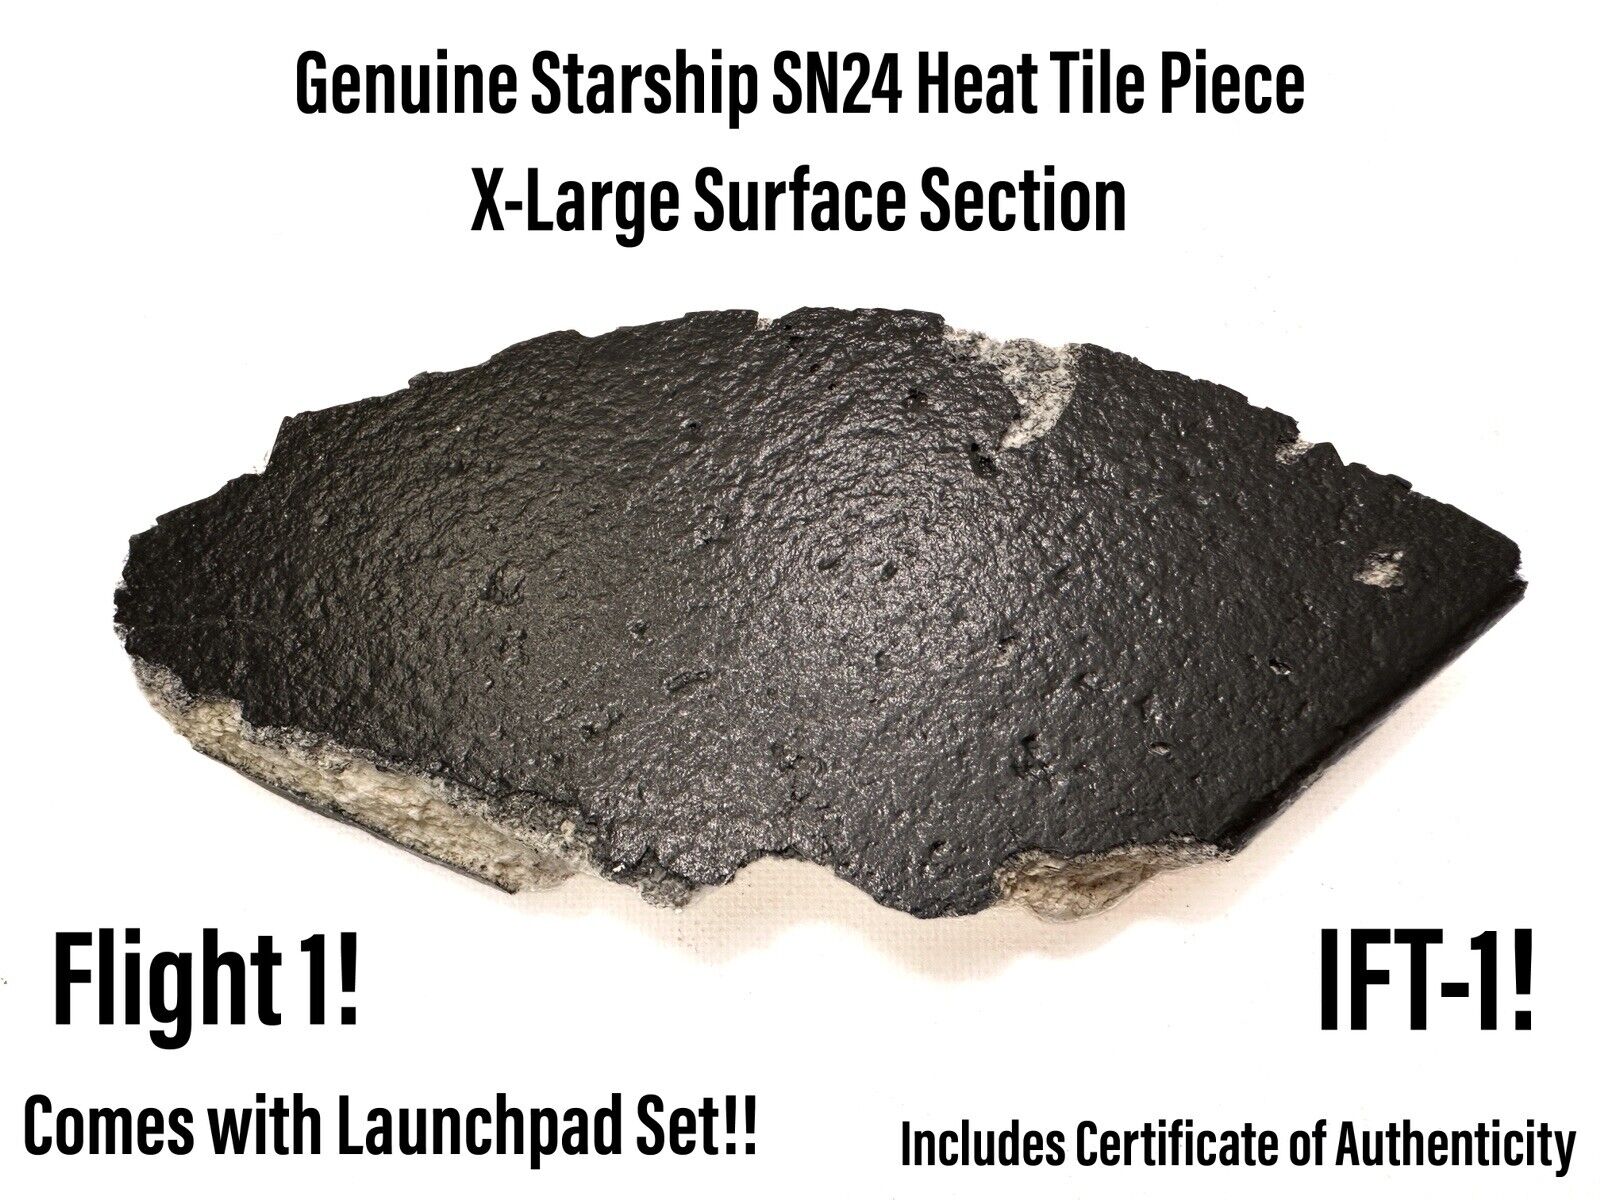 SpaceX Starship SN24 S24 X LargeHeat Shield Tile & Launchpad 3pc Collector Set